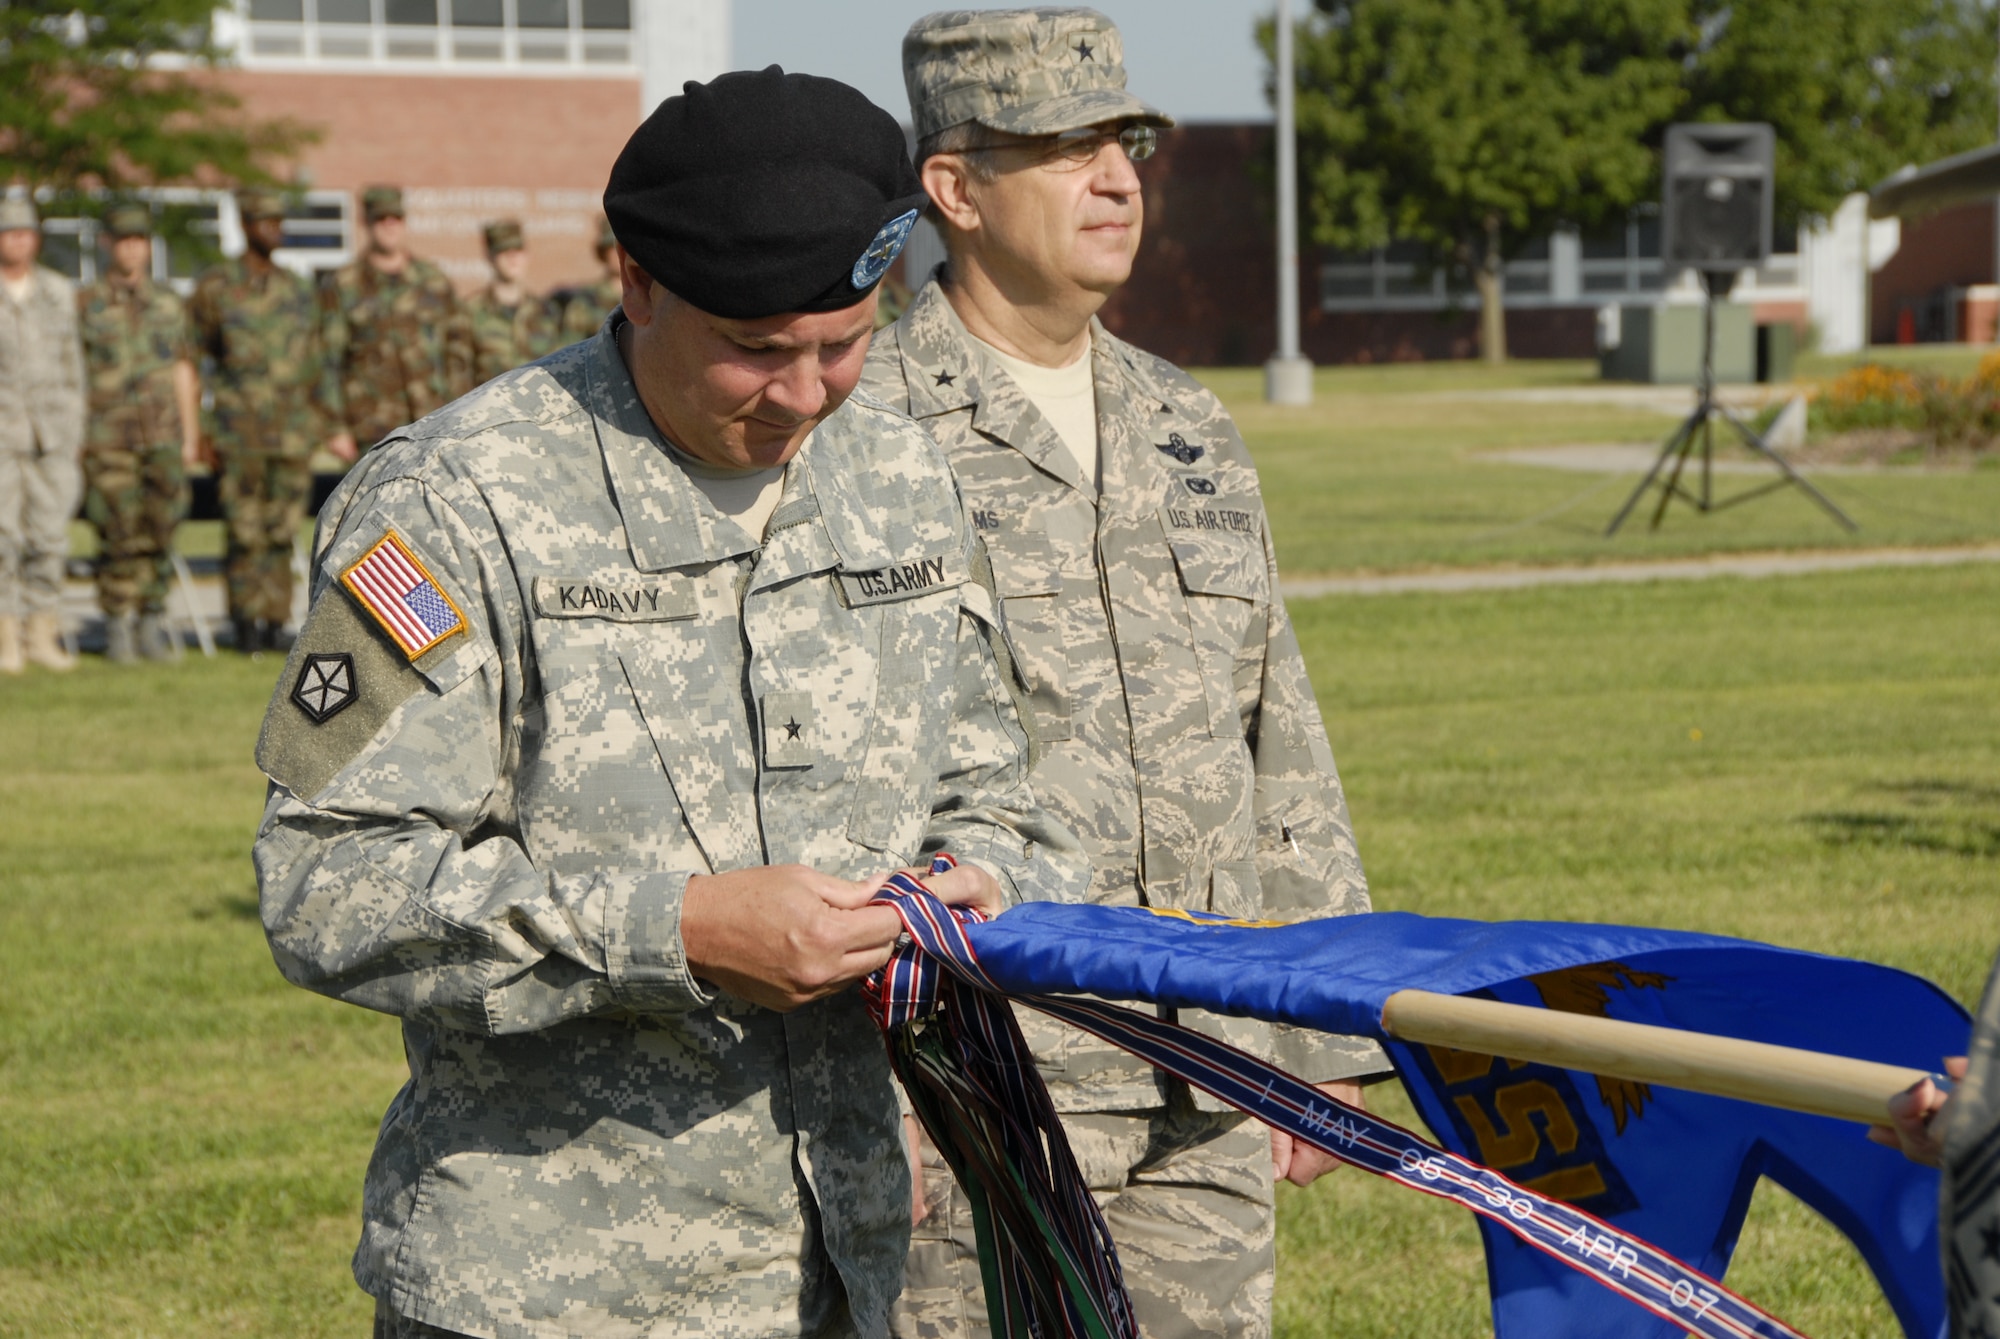 Brig. Gen. Timothy K. Kadavy, Adjutant General Nebraska,(center) pins the ninth Air Force Outstanding Unit Award streamer on the 155th Air Refueling Wing flag during a Honors Ceremony held at the Nebraska Air National Guard base on 3 August, 2008. The 155th ARW was cited for support of Homeland Defense, Operation Noble Eagle, Operation Iraqi Freedom, Environmental Protection, Compliance Inspections, Community Involvement, and Flying Safety.  (Nebraska Air National Guard photo by Master Sgt. Alan Brown)(Released)